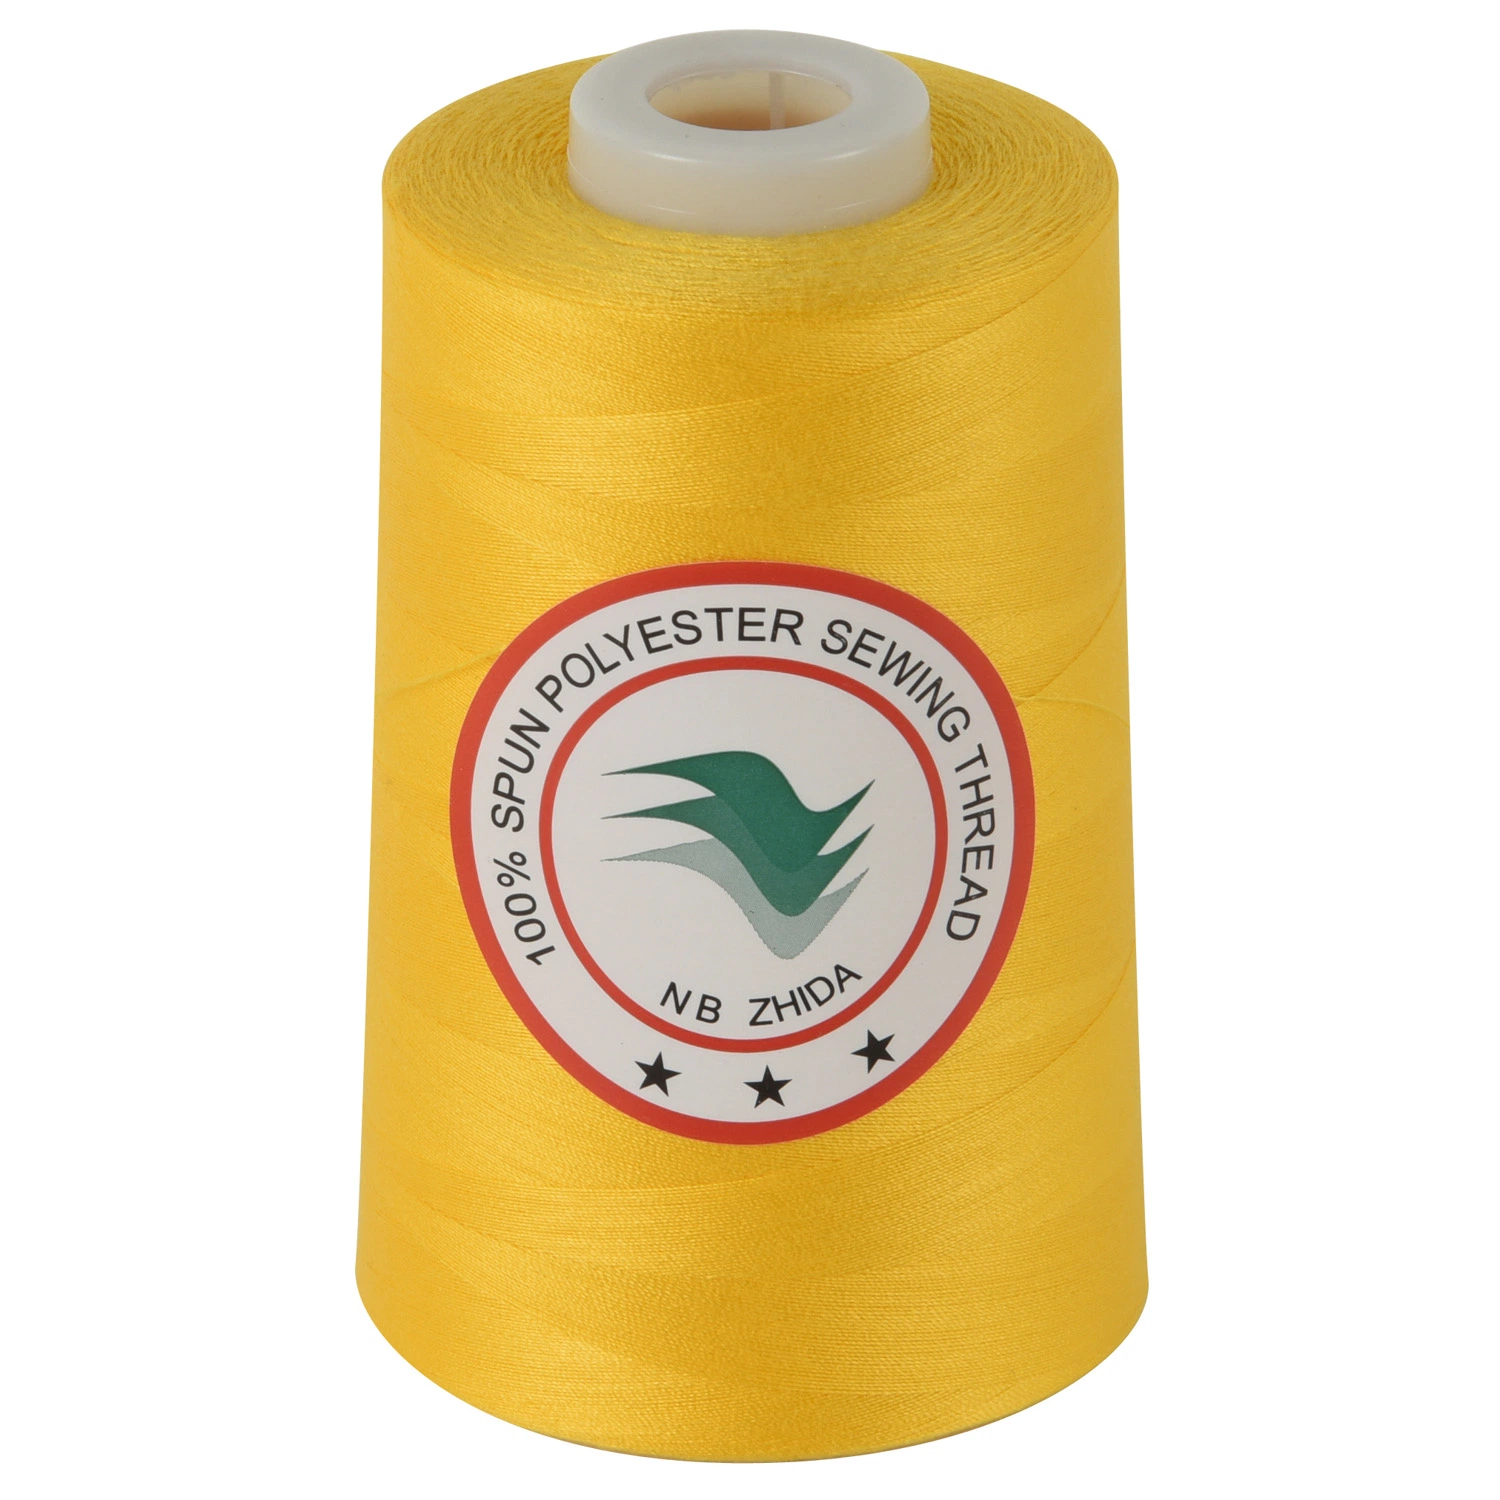 Factory Provide 100% Spun Polyester Sewing Thread 20s/4 5000m for Quality Clothes, Bags, Home Textiles